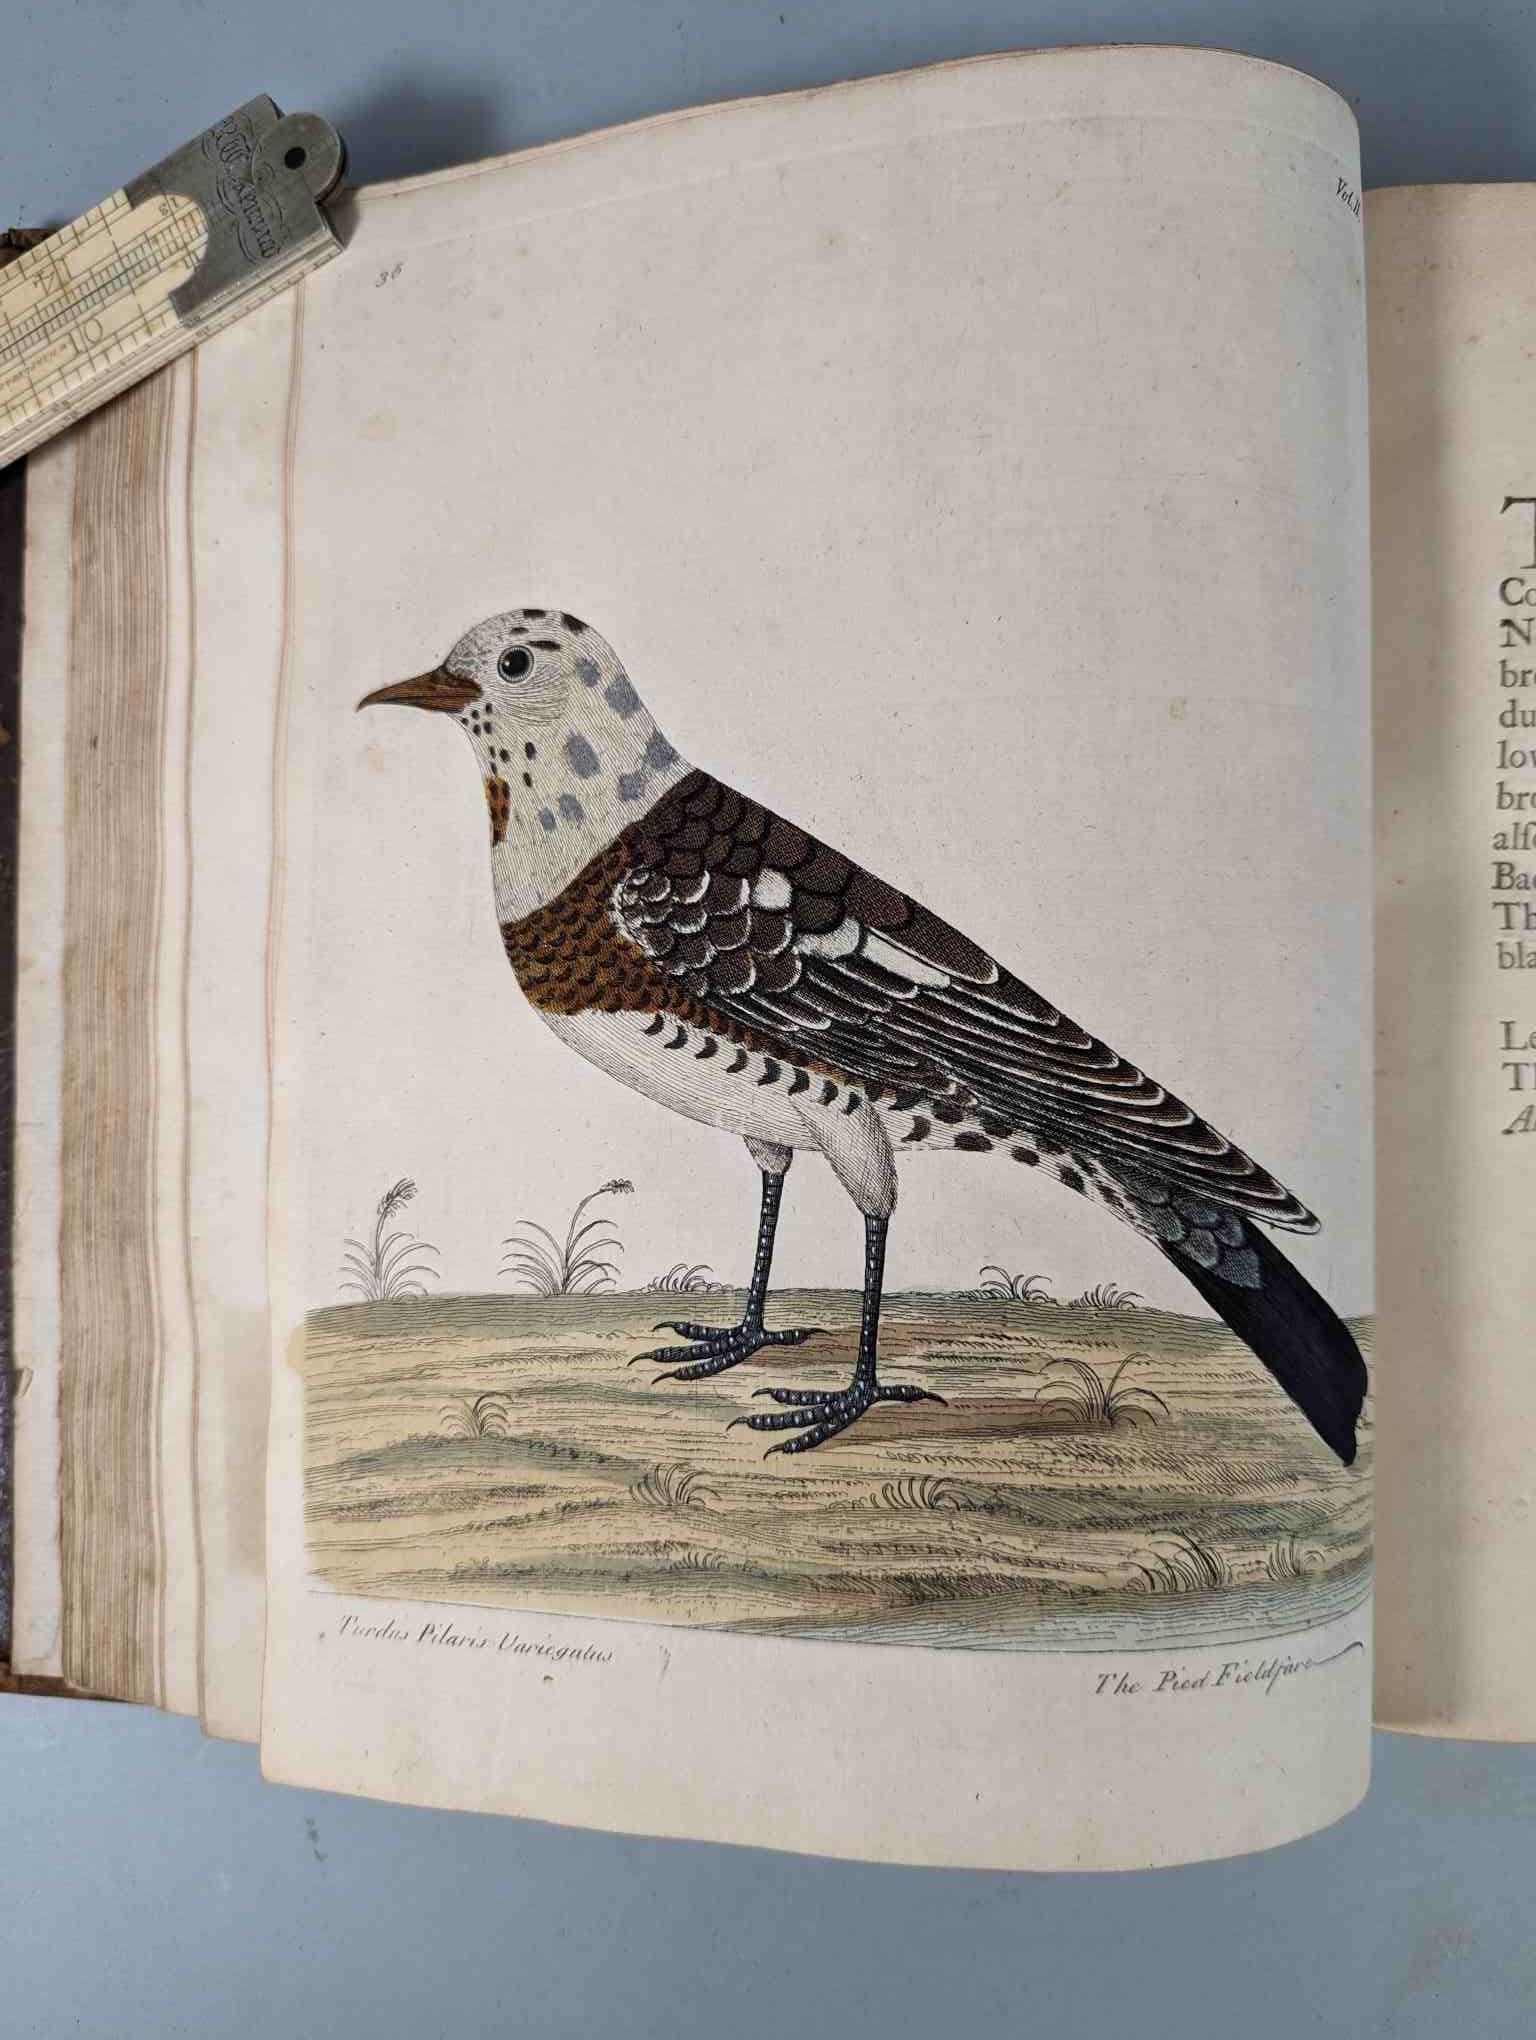 ALBIN, Eleazar. A Natural History of Birds, to which are added, Notes and Observations by W. - Image 140 of 208